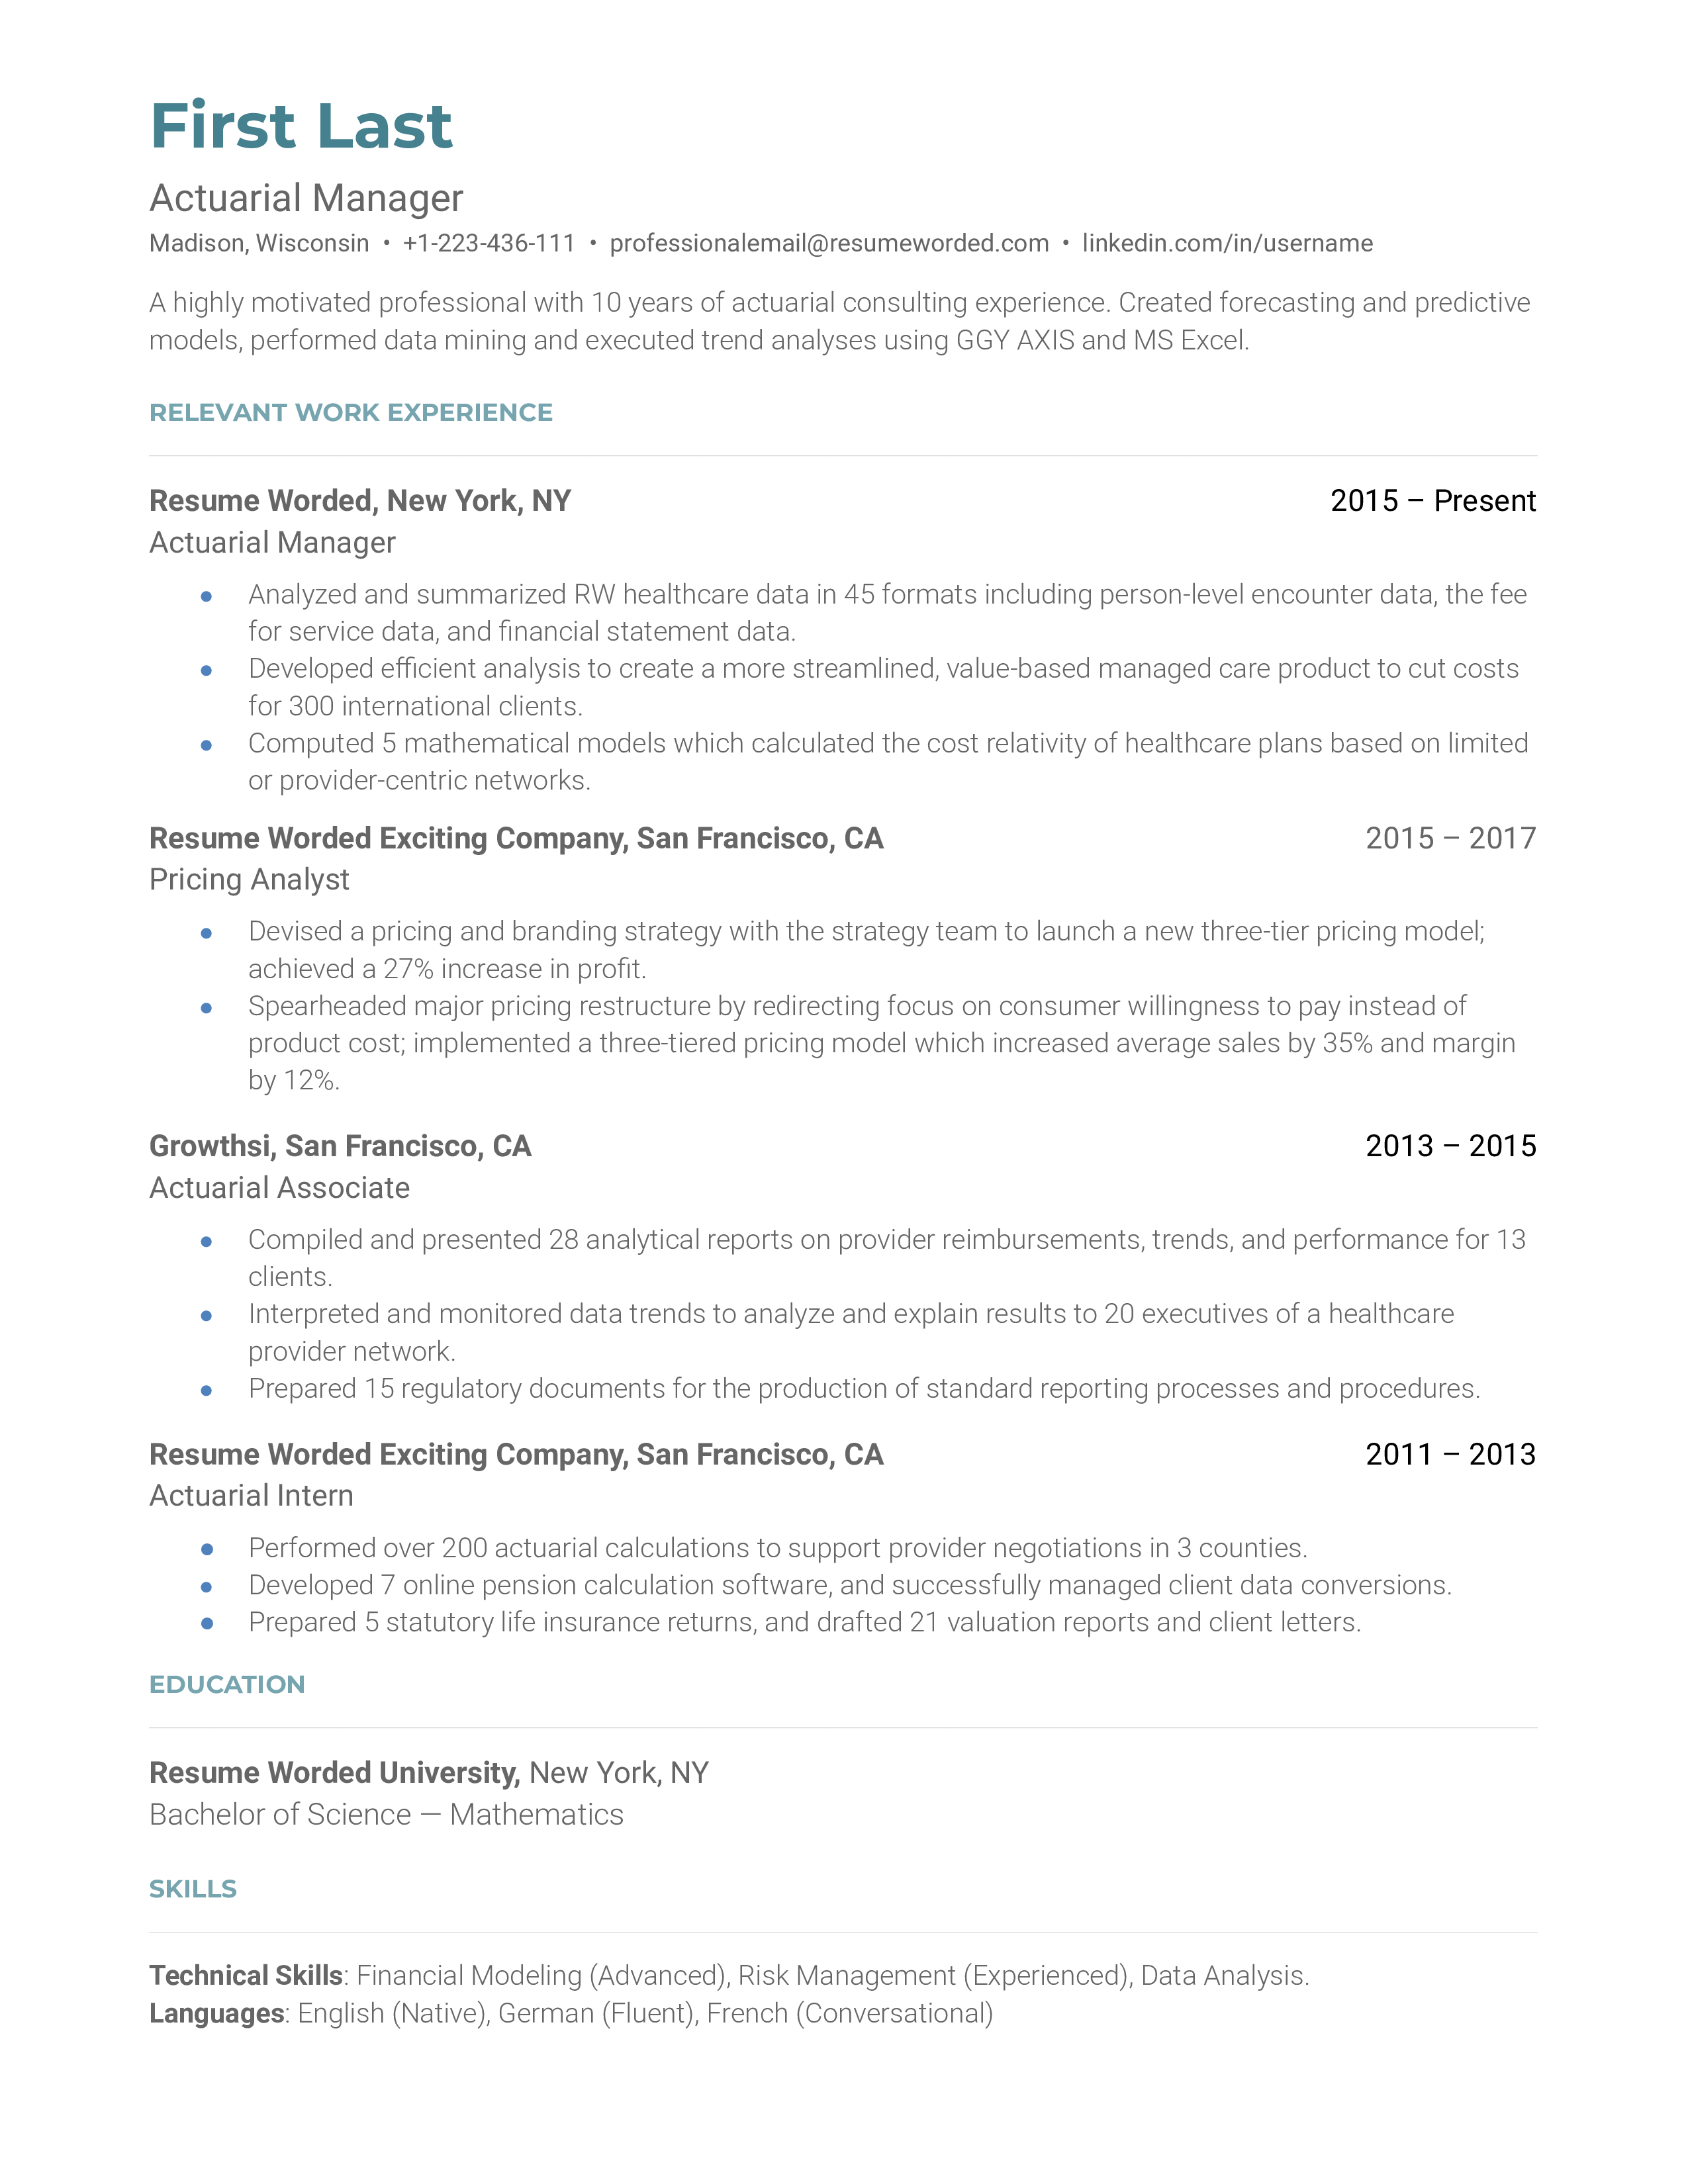 Snapshot of a CV for Actuarial Manager role with focus on team leadership and tech skills.